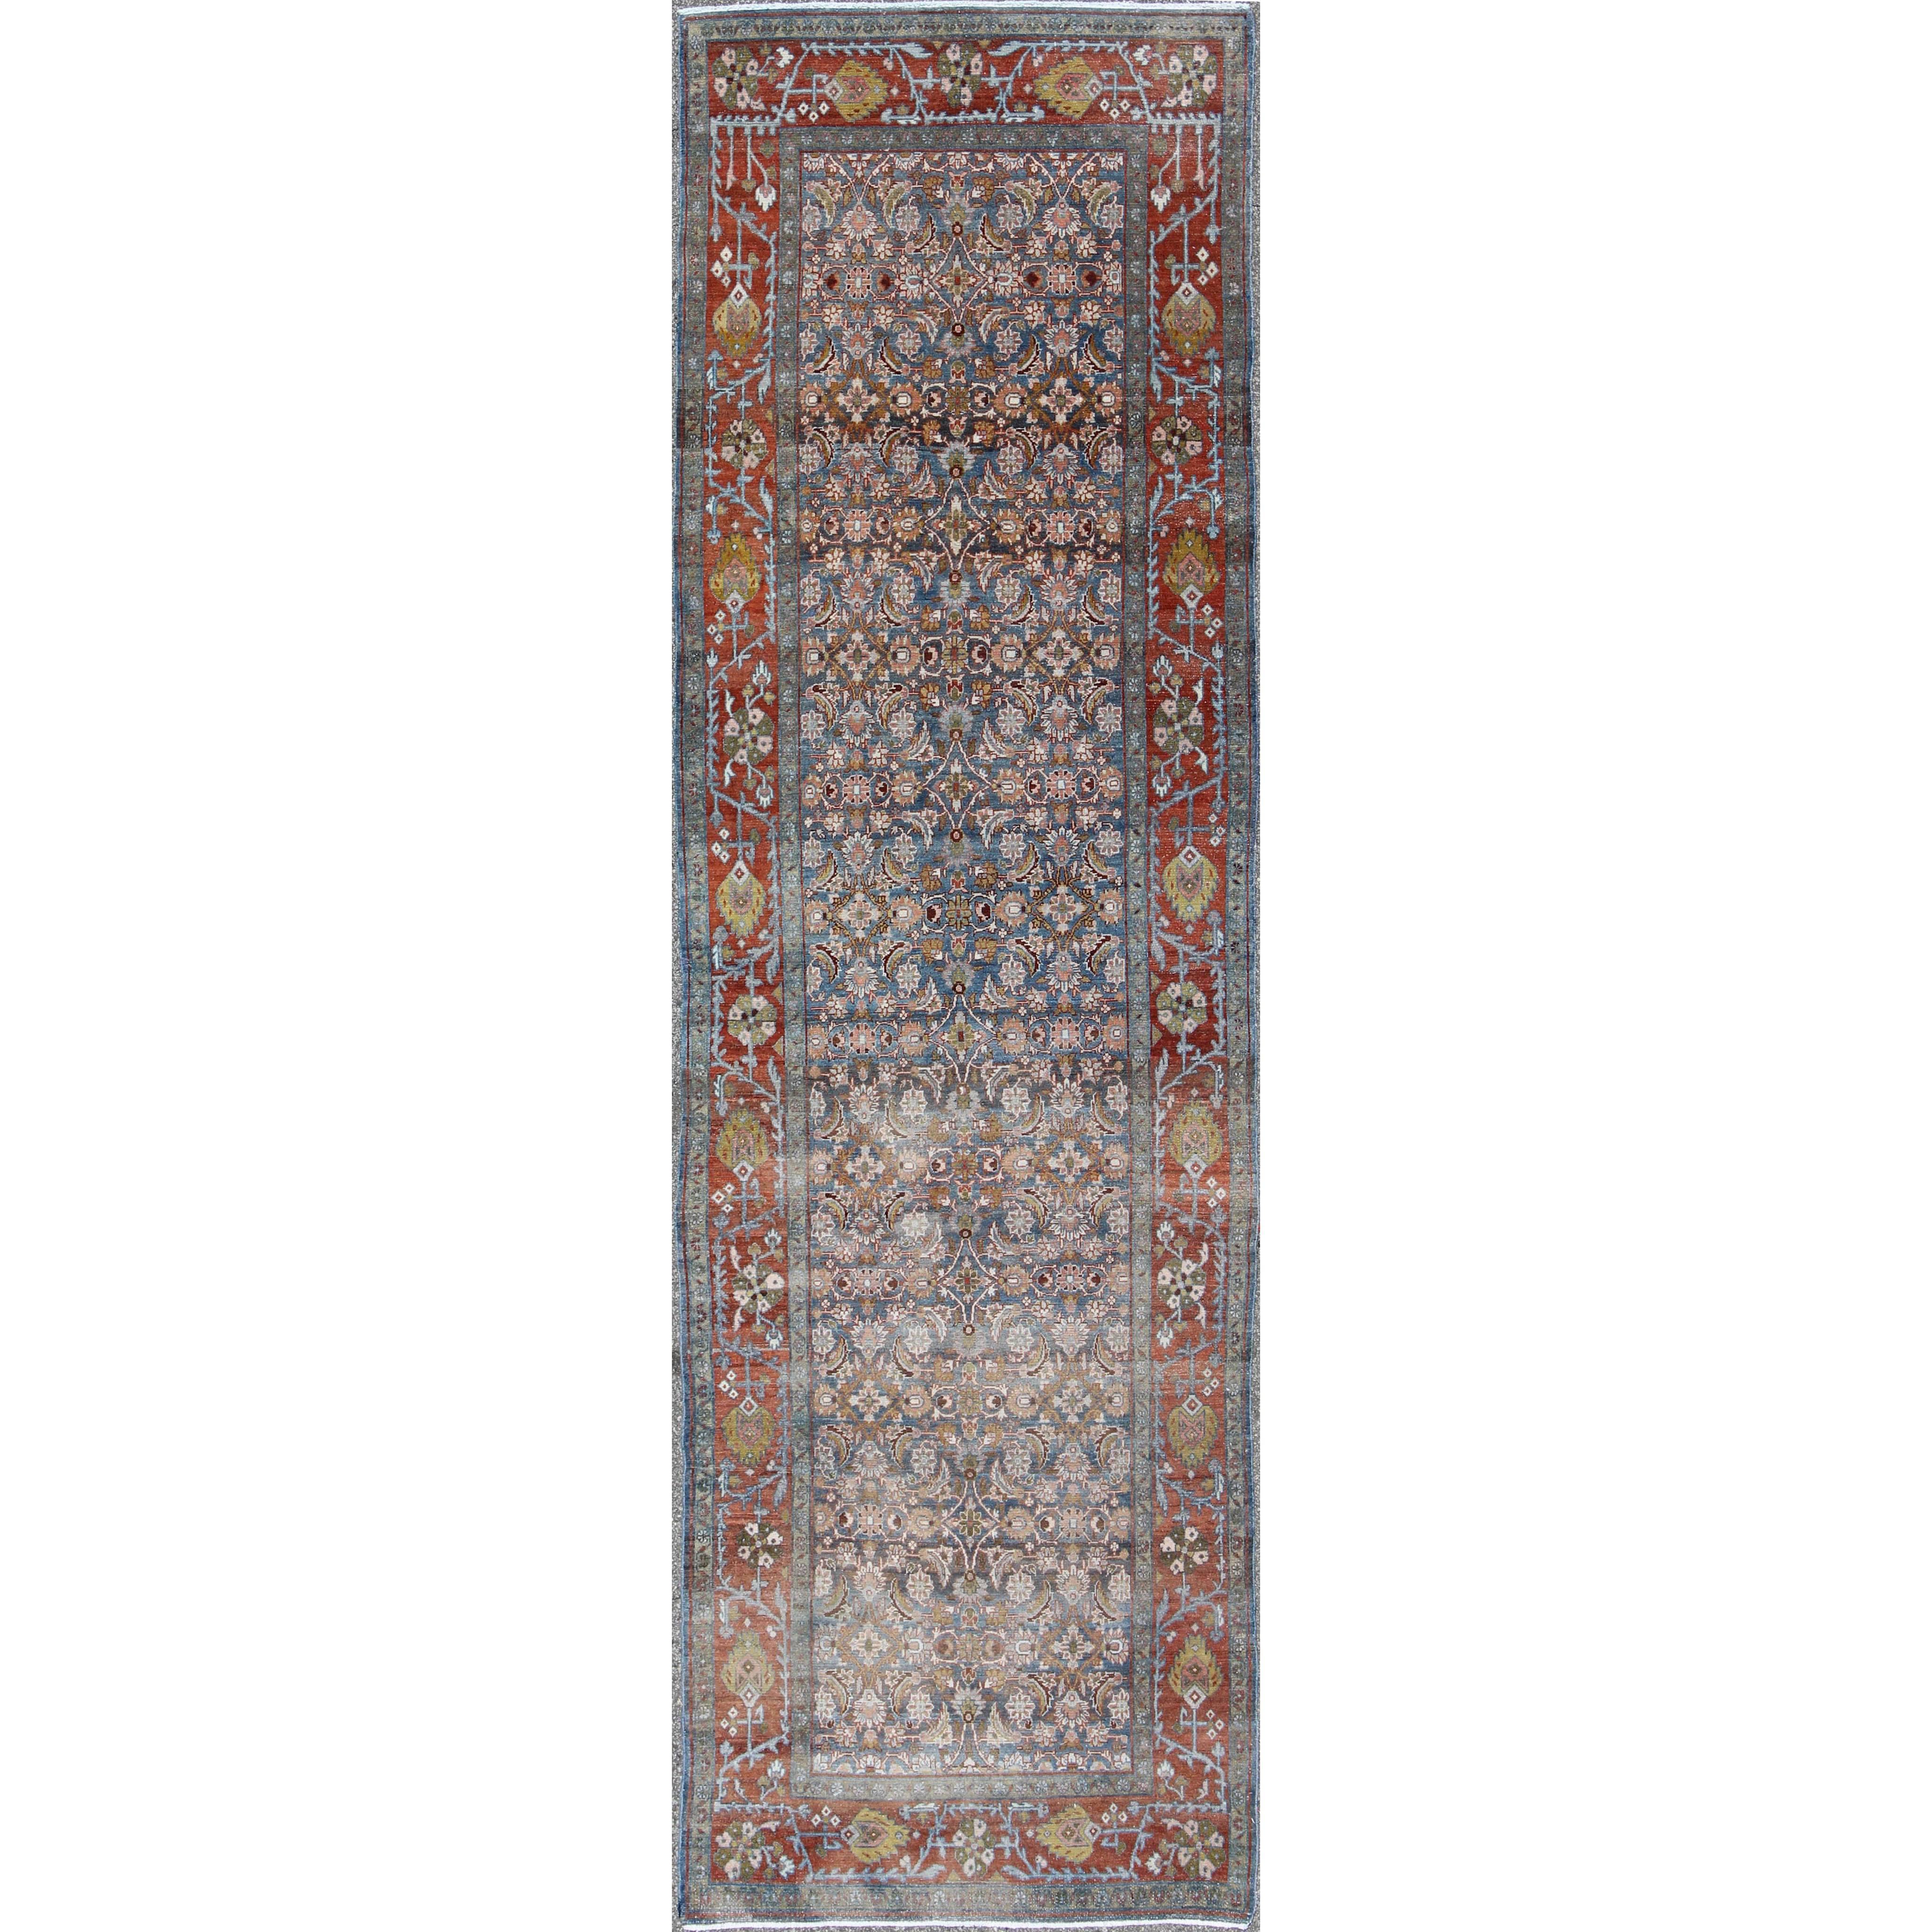 Blue, Red and Green Antique Persian Malayer Runner with Geometric Floral Design